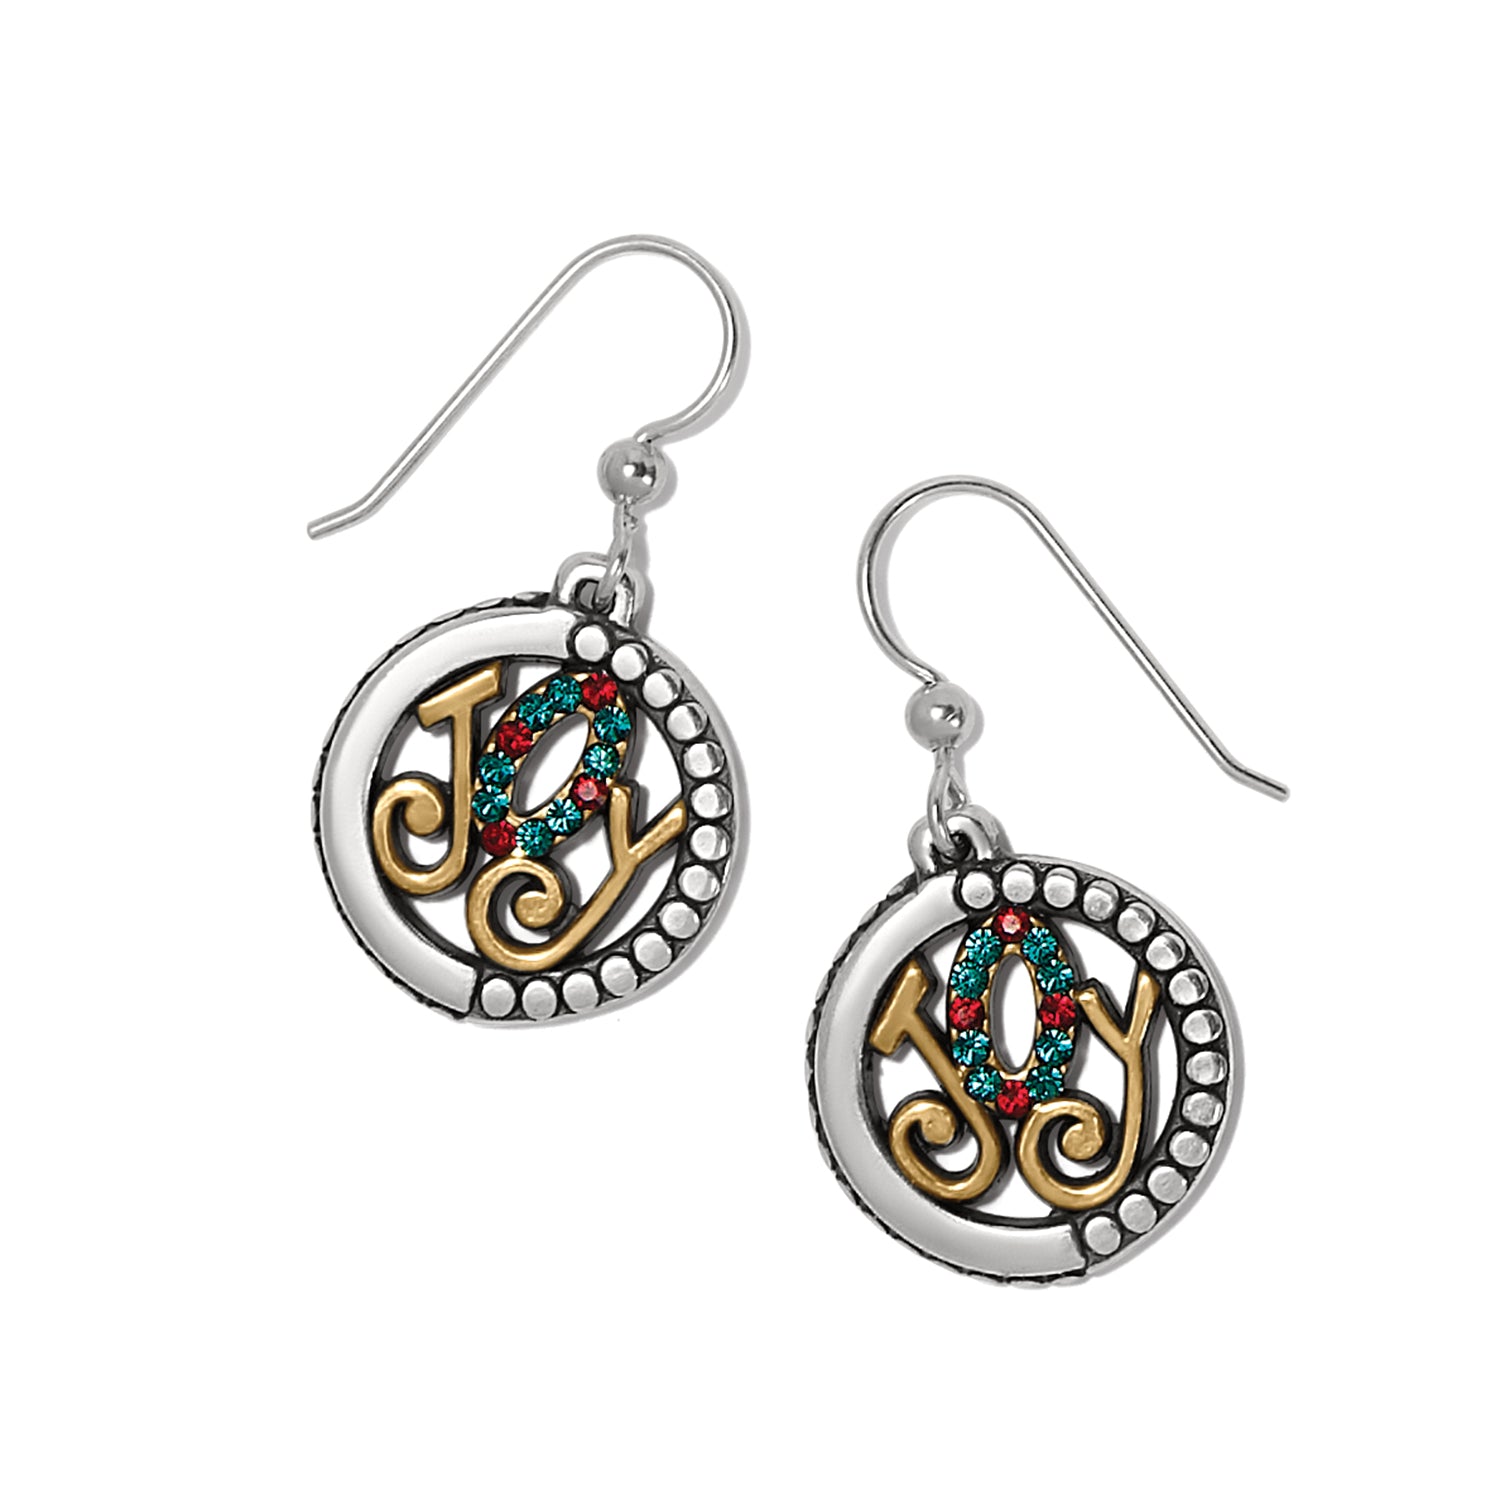 Brighton Holiday Joy French Wire Earrings